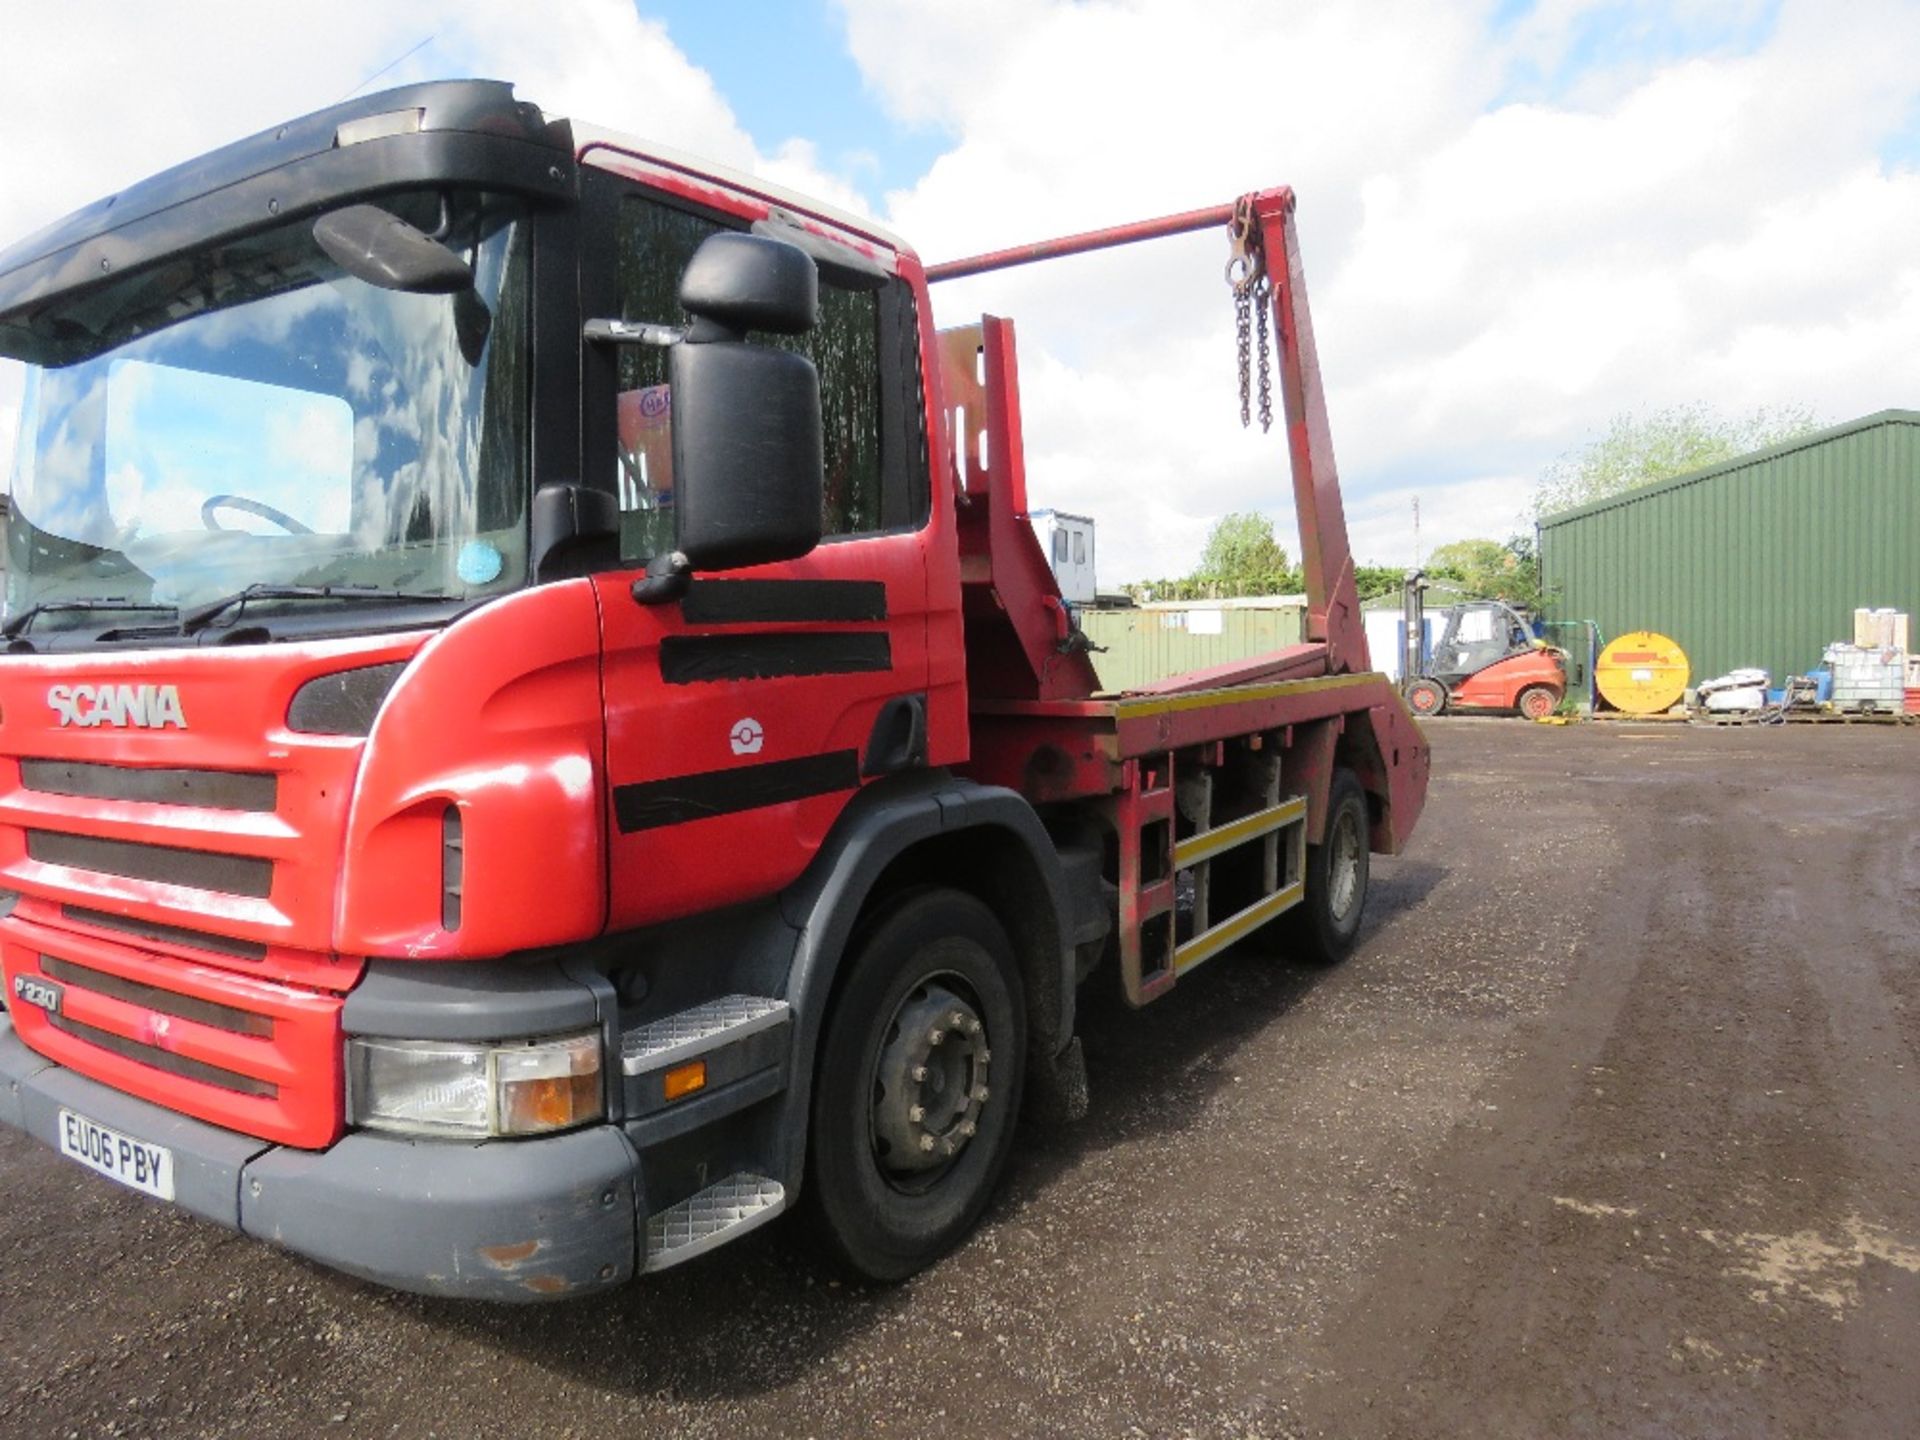 SCANIA P230 4X2 CHAIN LIFT SKIP LORRY YEAR 2006. REG:EU06 PBY. 402,445 REC KMS. MANUAL GEARBOX. 18 T - Image 4 of 18